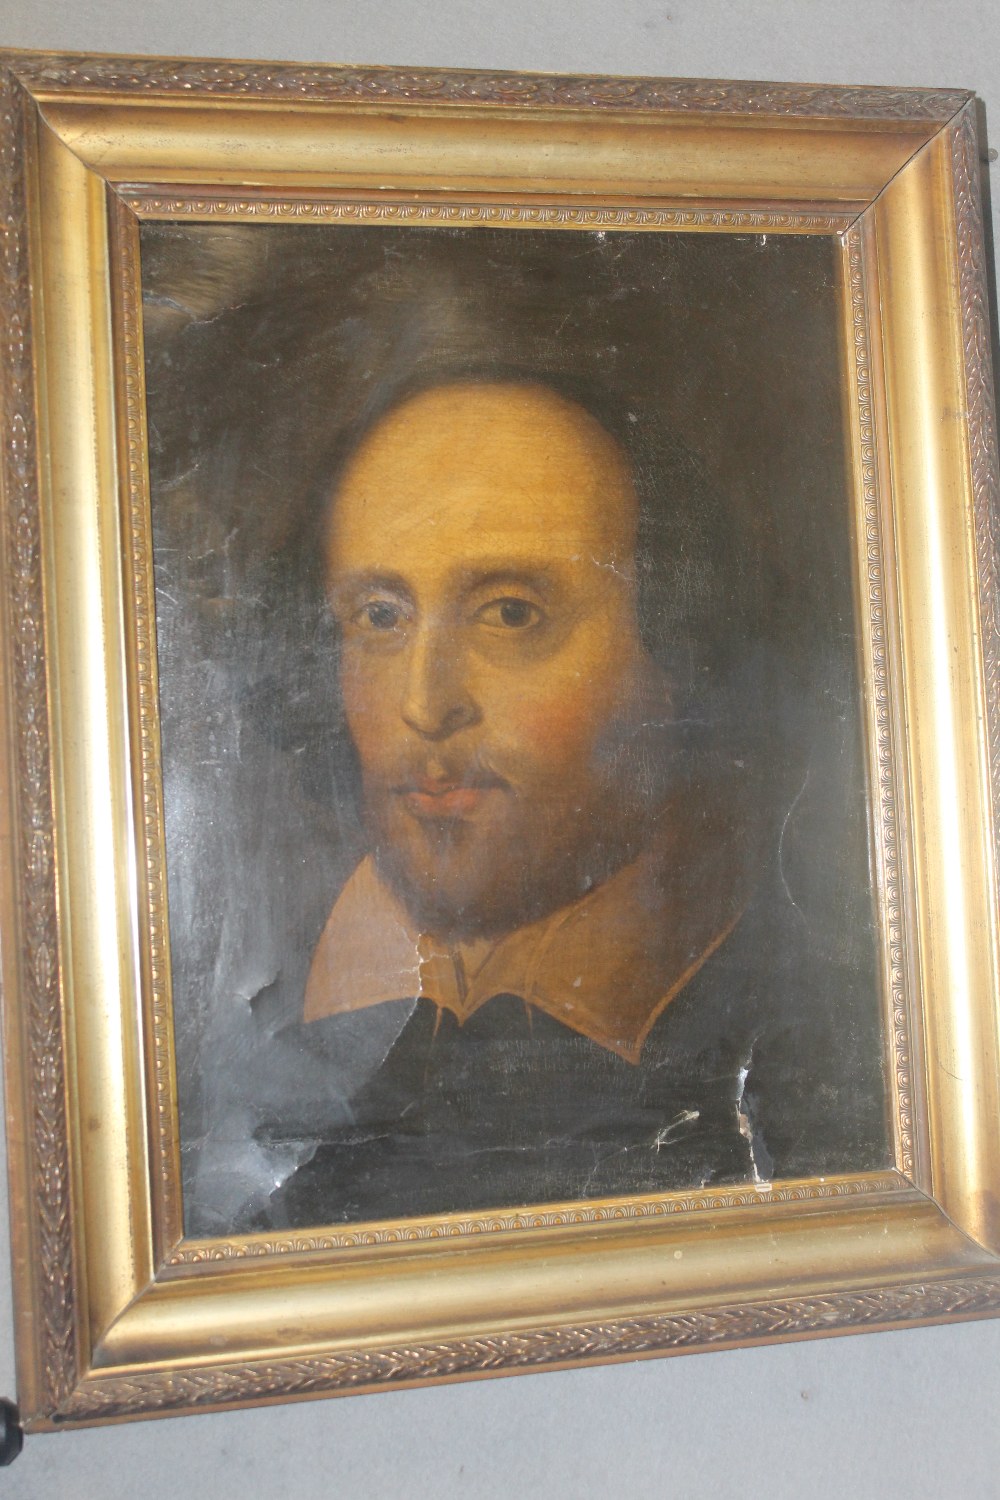 A PRINT SHOWING A PORTRAIT OF WILLIAM SHAKESPEARE